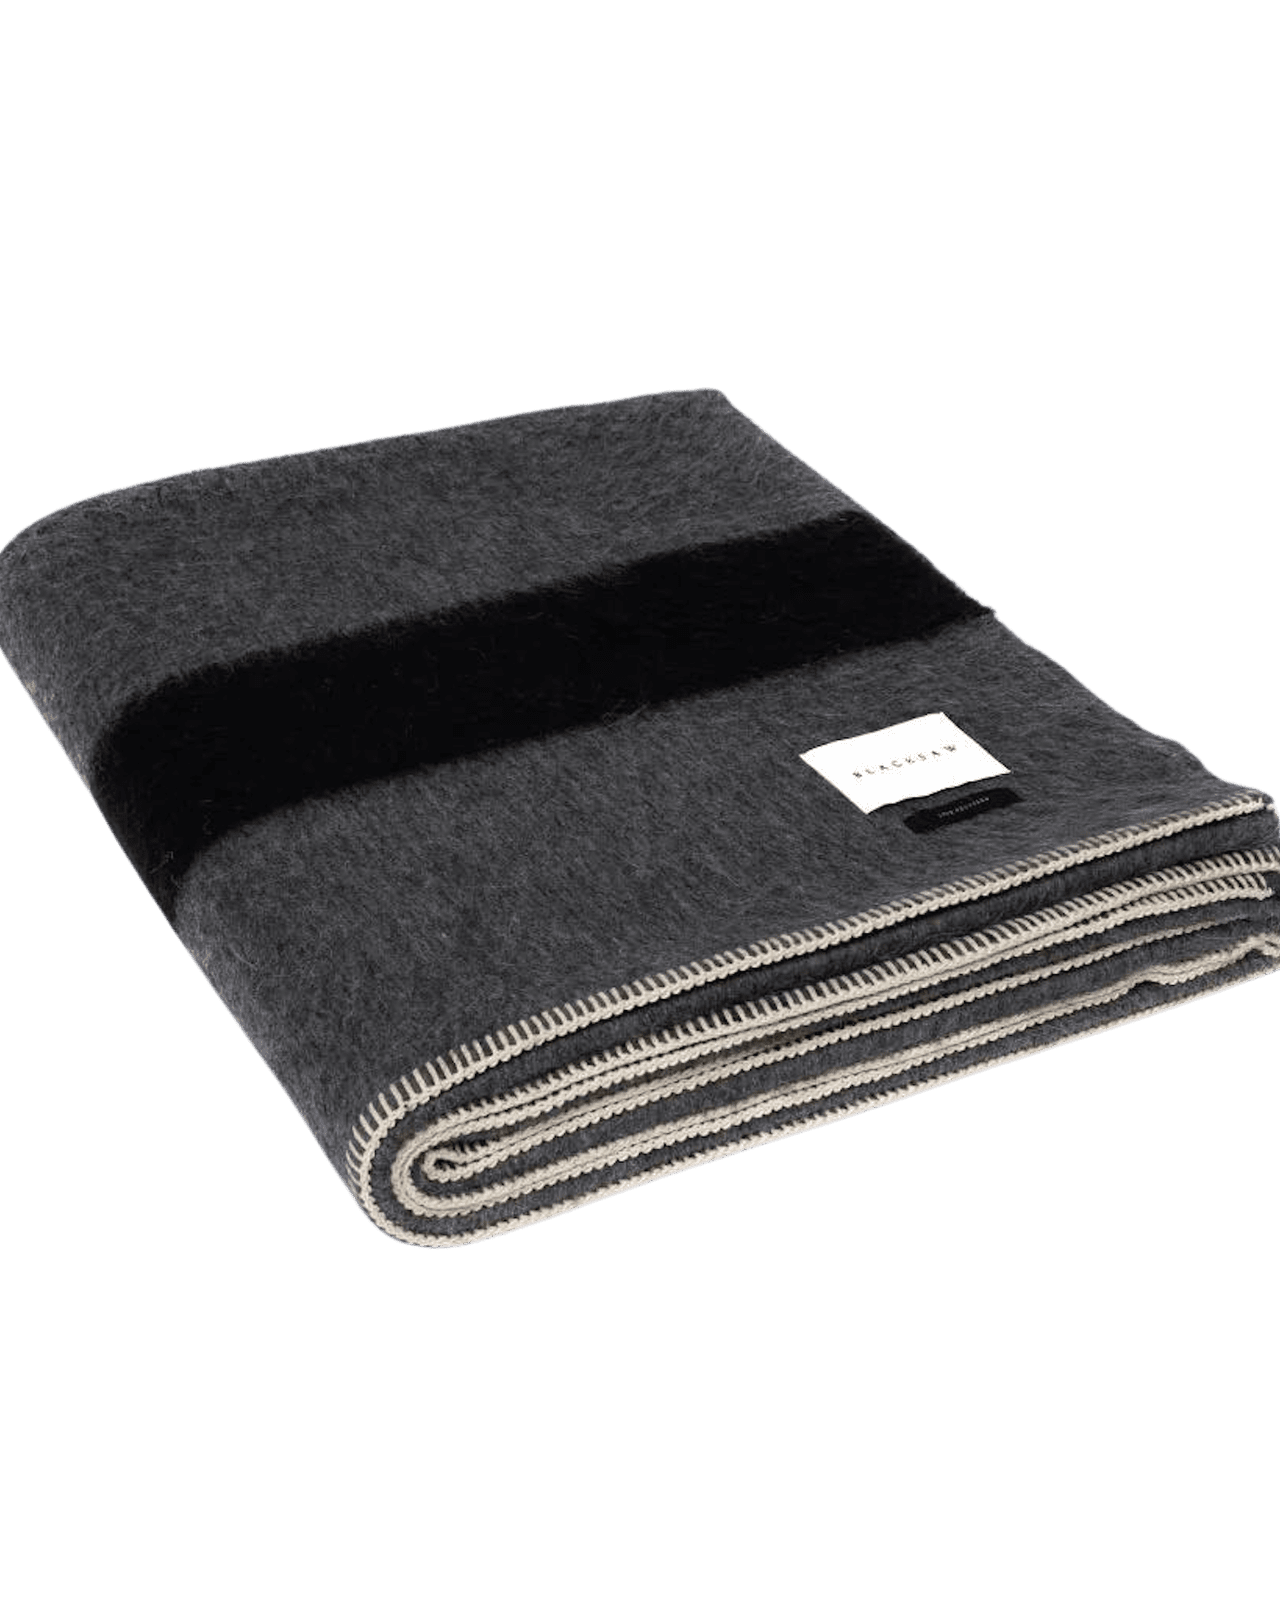 The Siempre Recycled Blanket - Charcoal with Black Stripes